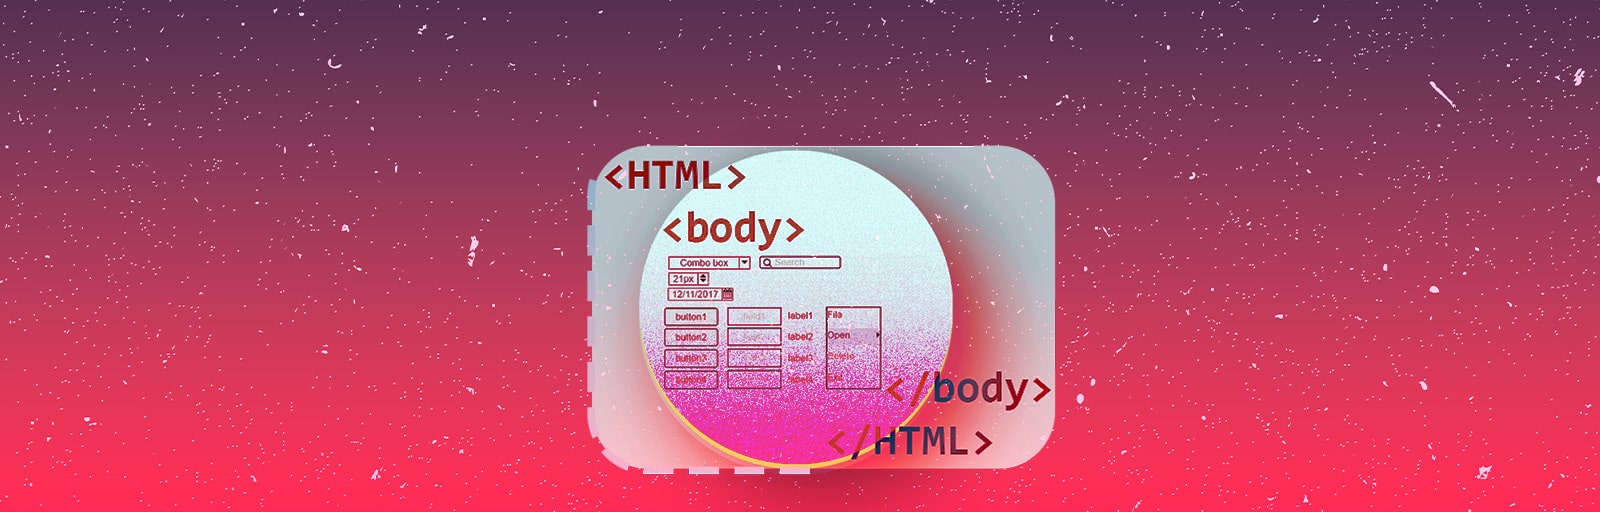 Create Html Page